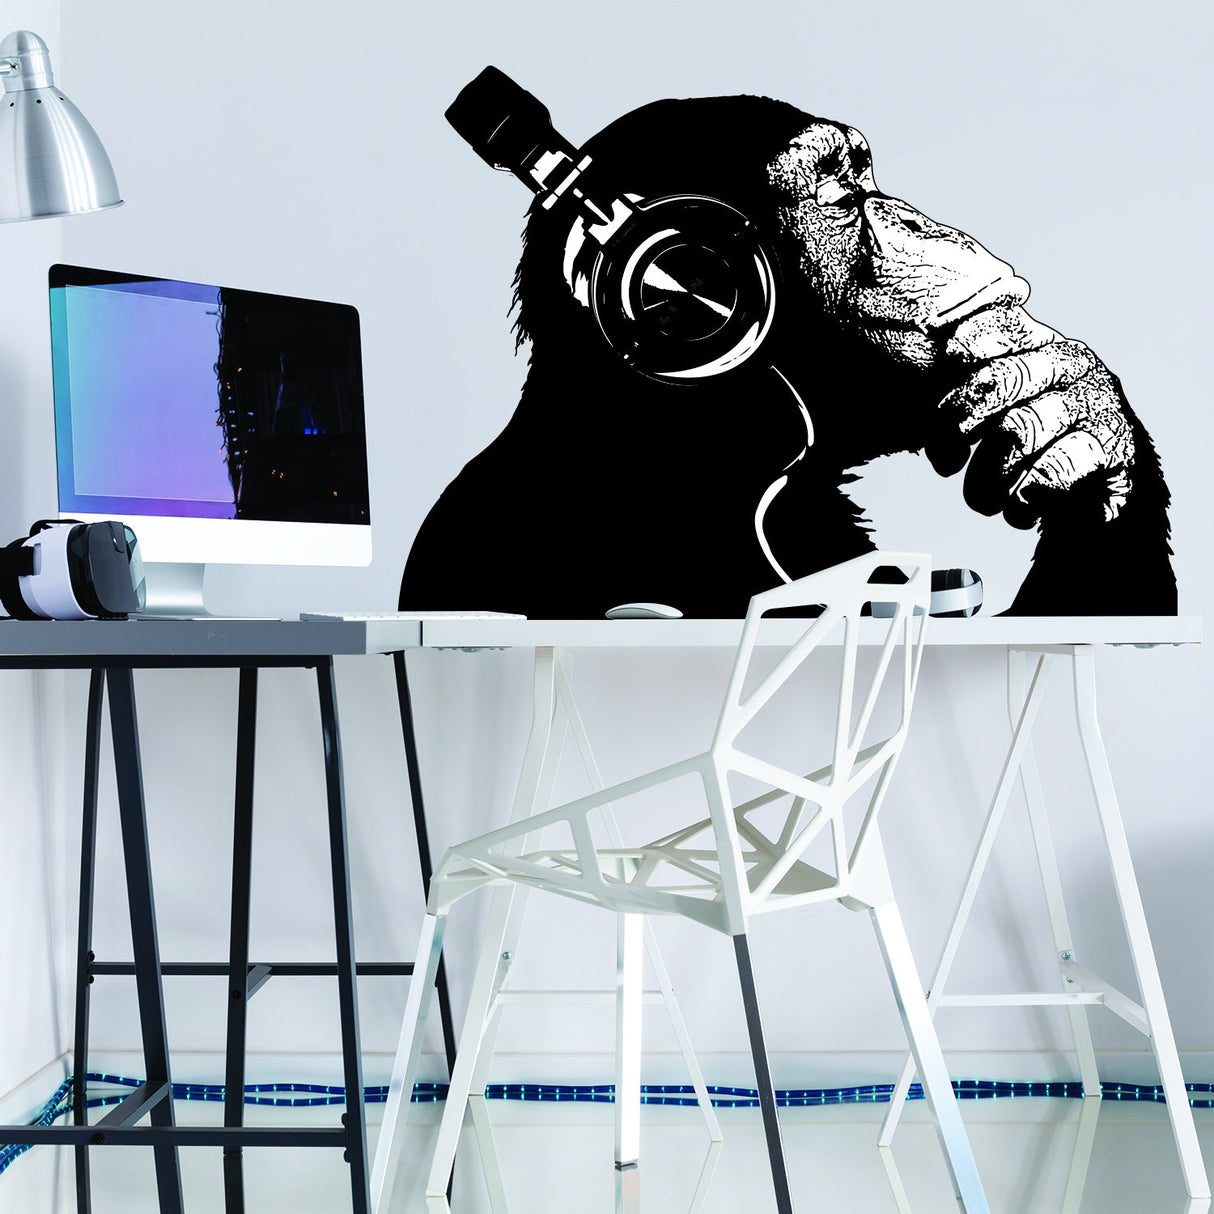 Banksy Wall Decal Thinking Monkey Art Sticker - Dj Chimp The Thinker Gorilla With Headphones Home Decals